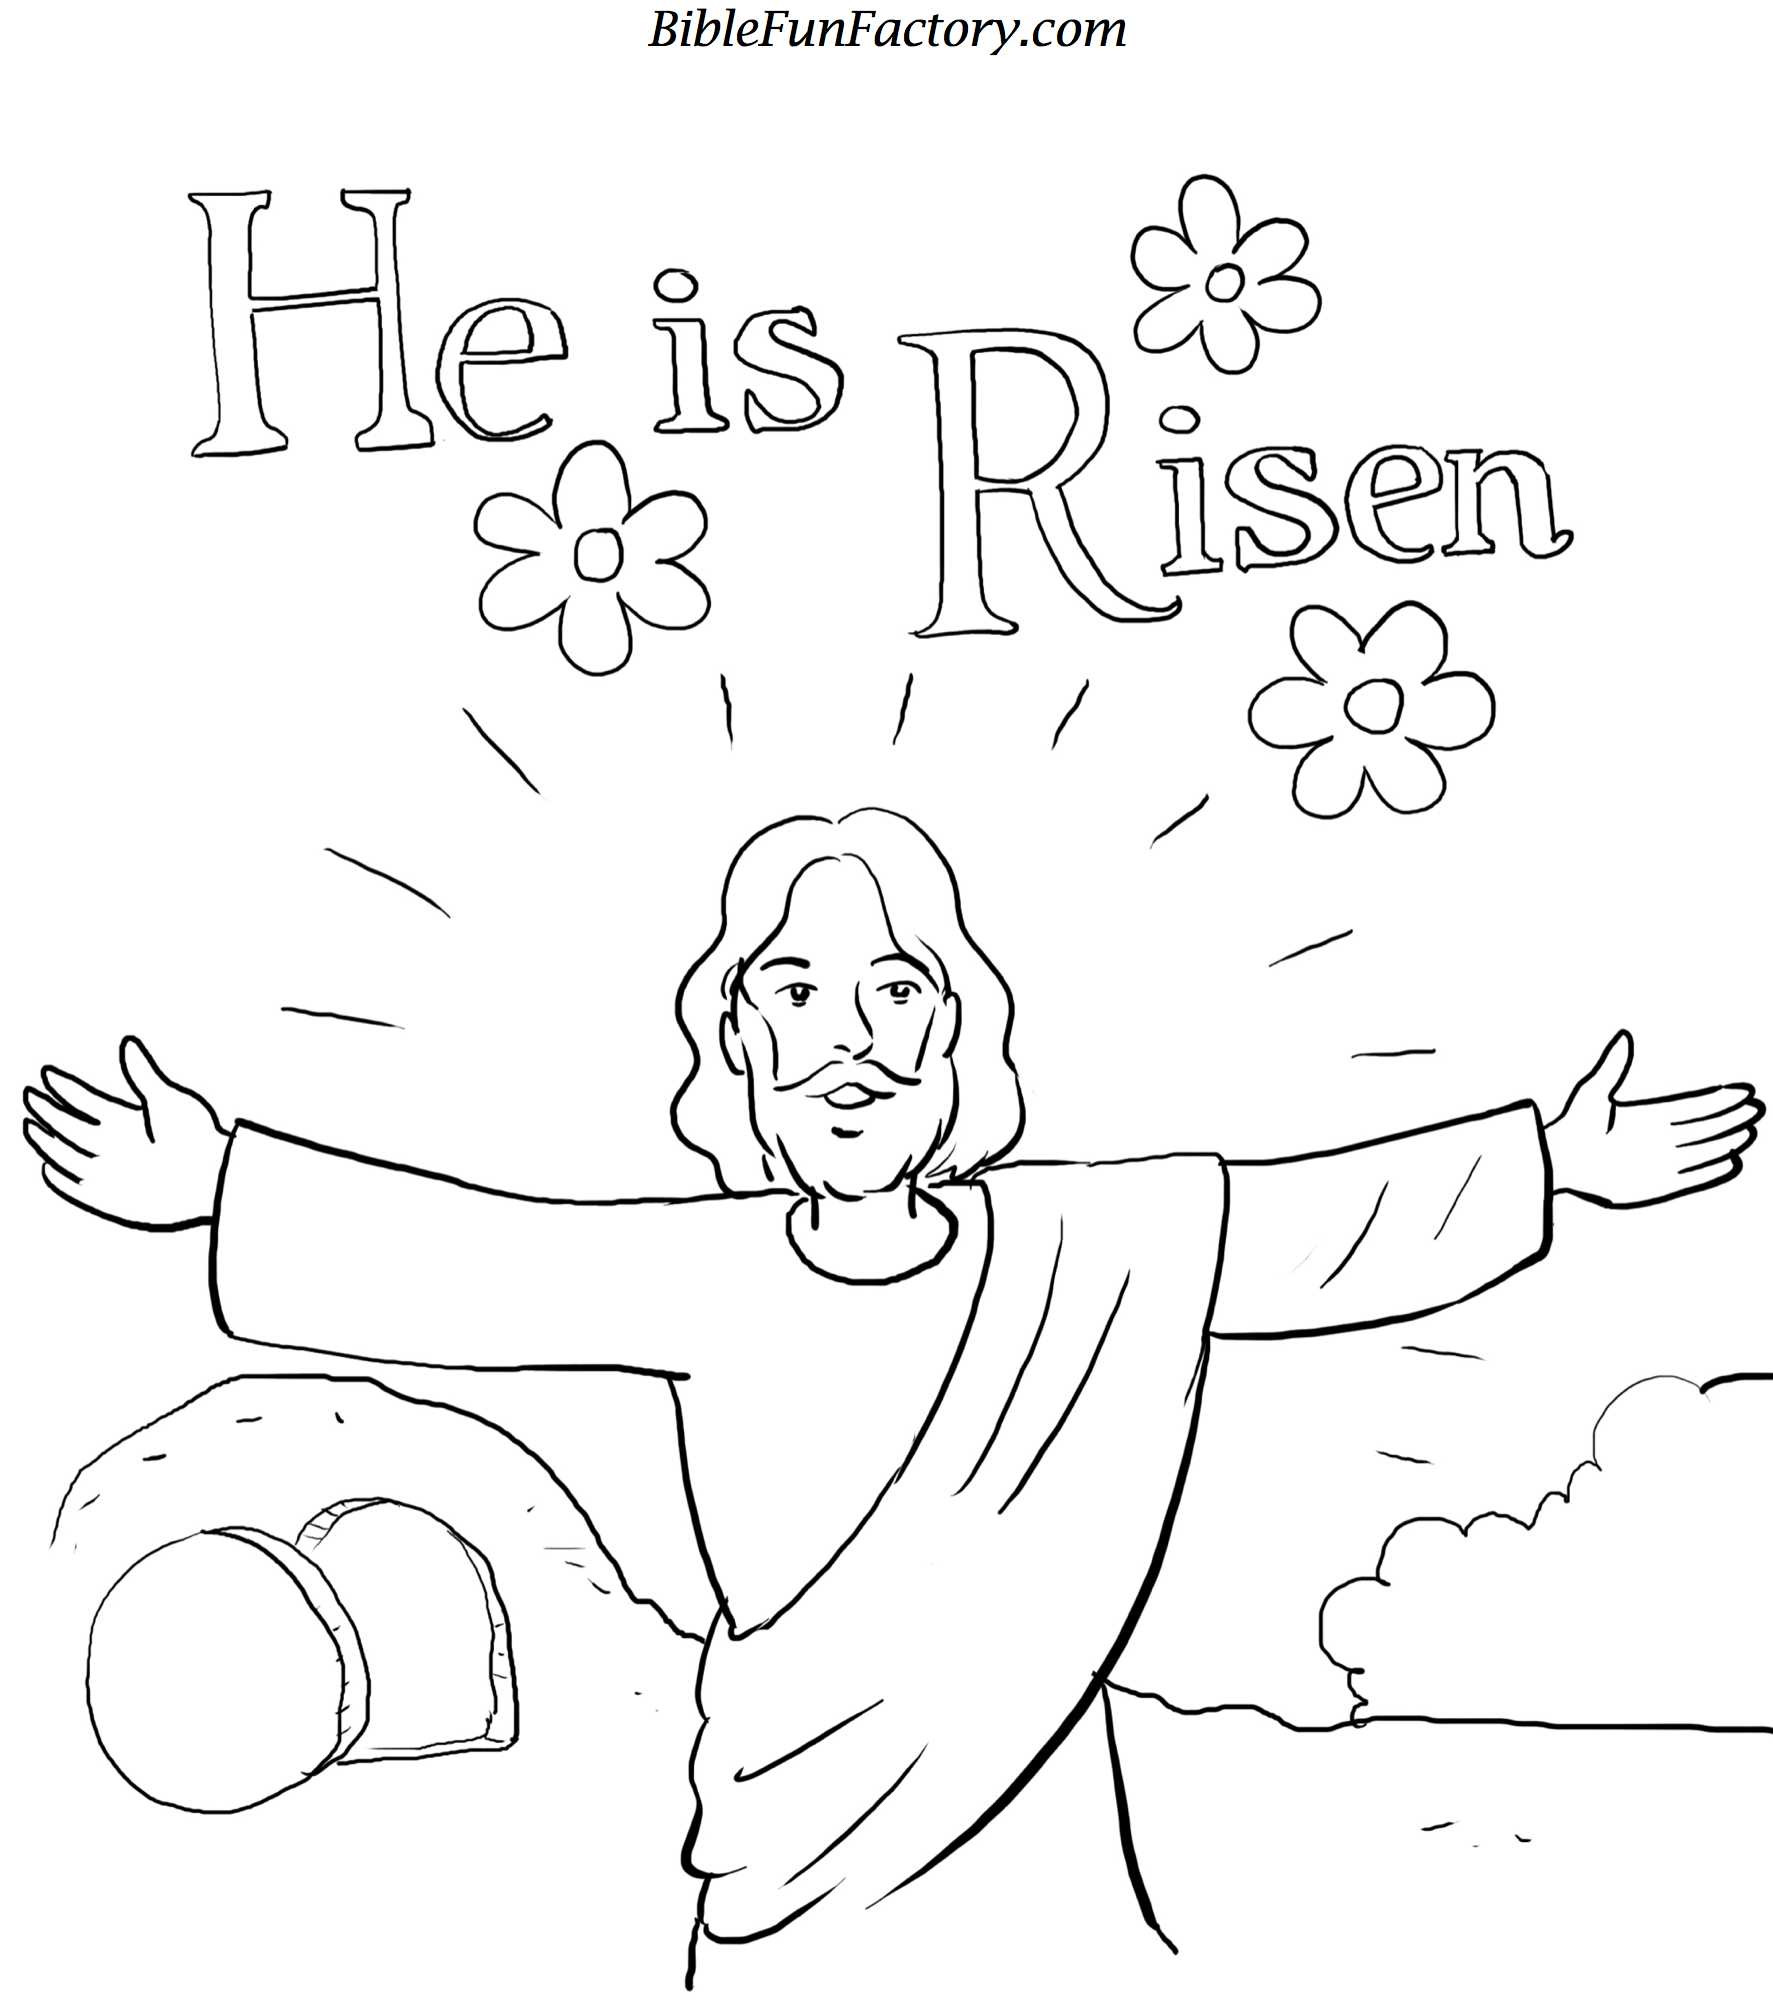 Easter Bible Coloring Pages For Toddlers
 Easter Coloring Sheet Bible Lessons Games and